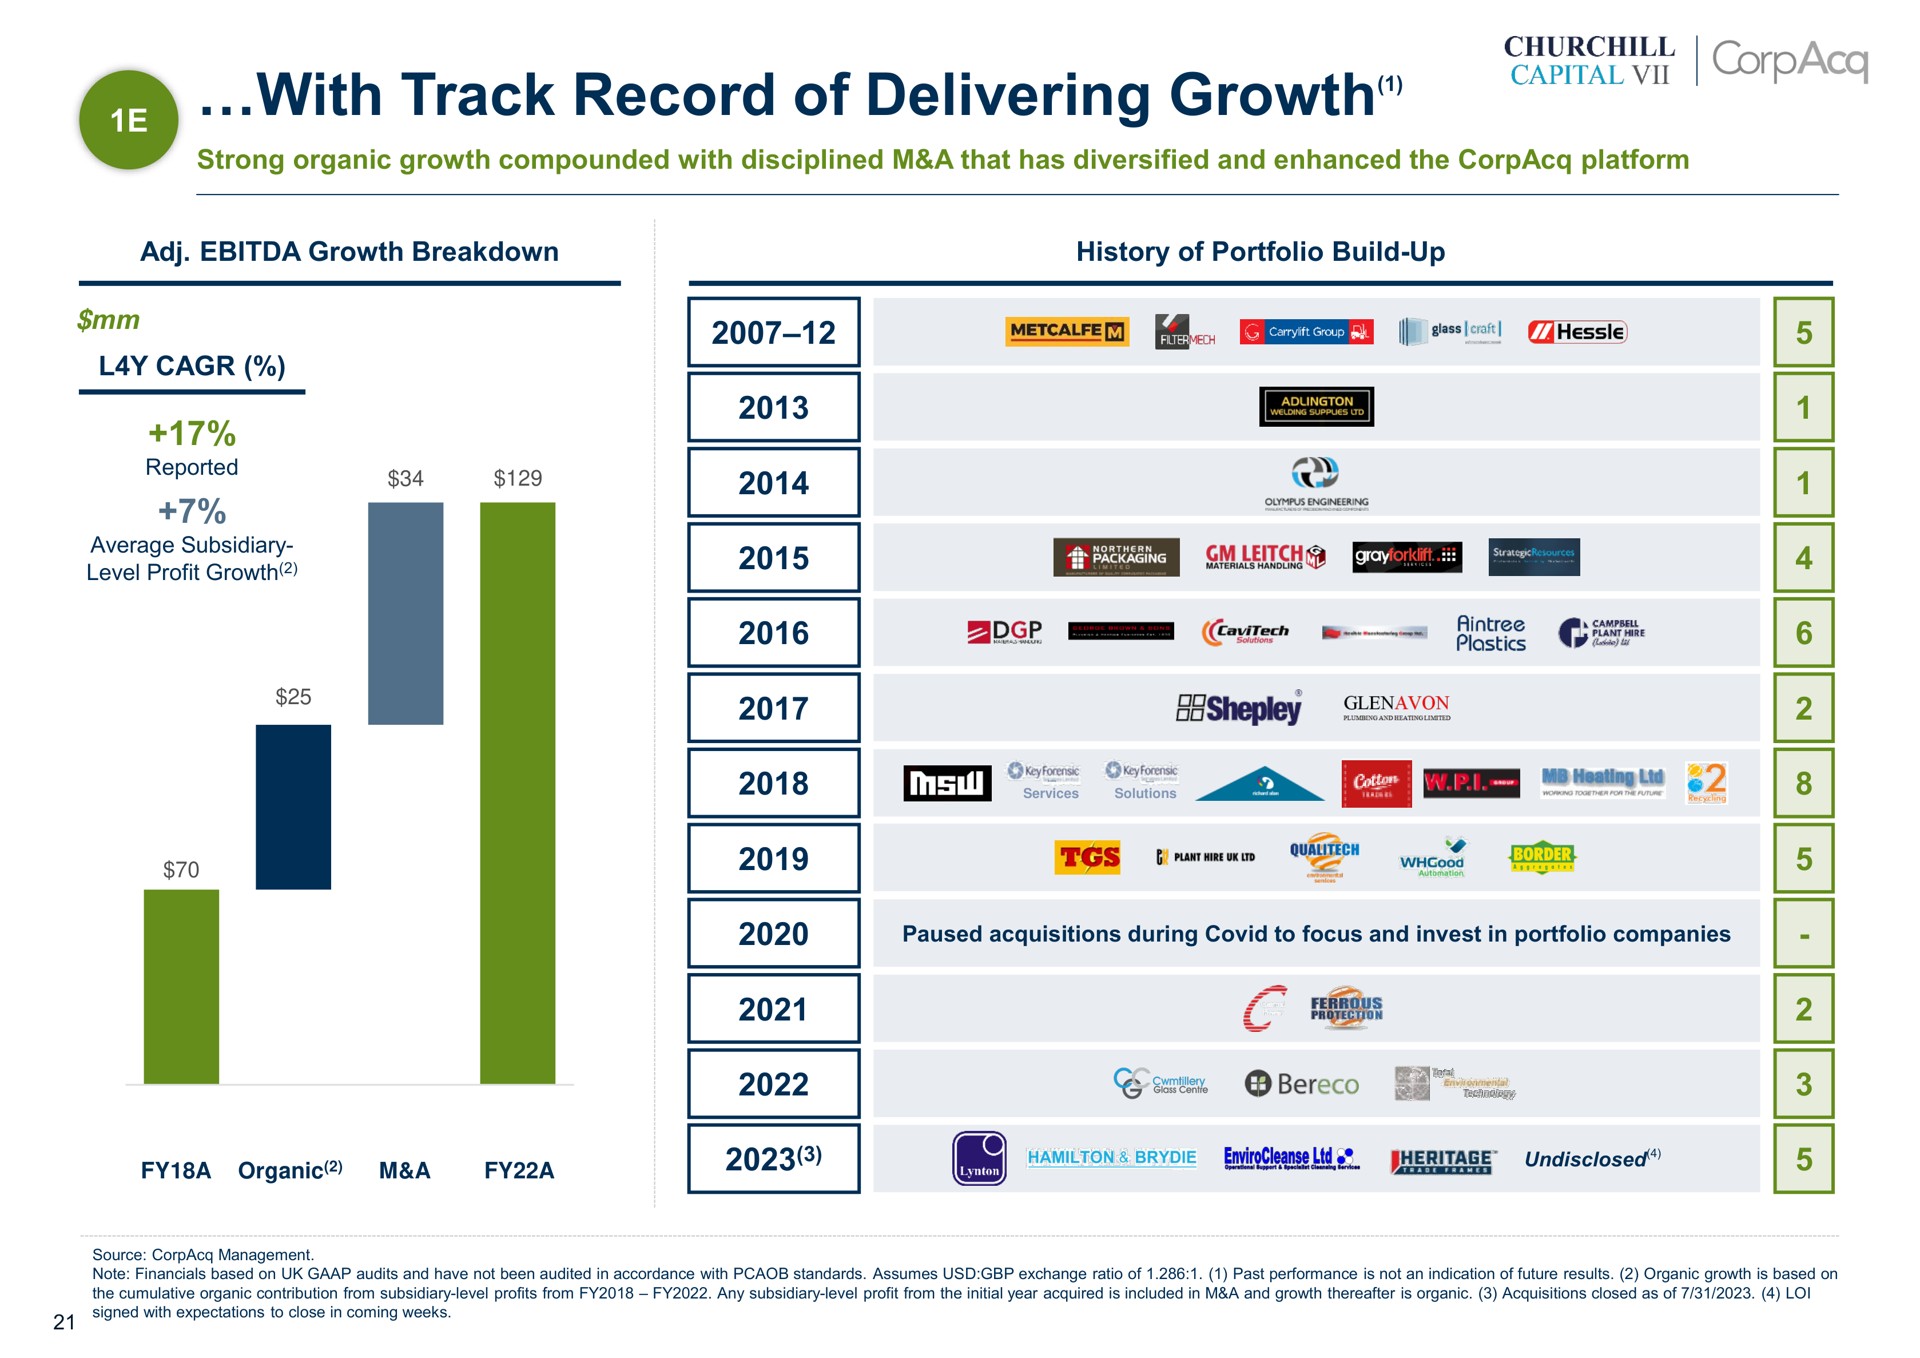 with track record of delivering growth reported oar in i i | CorpAcq